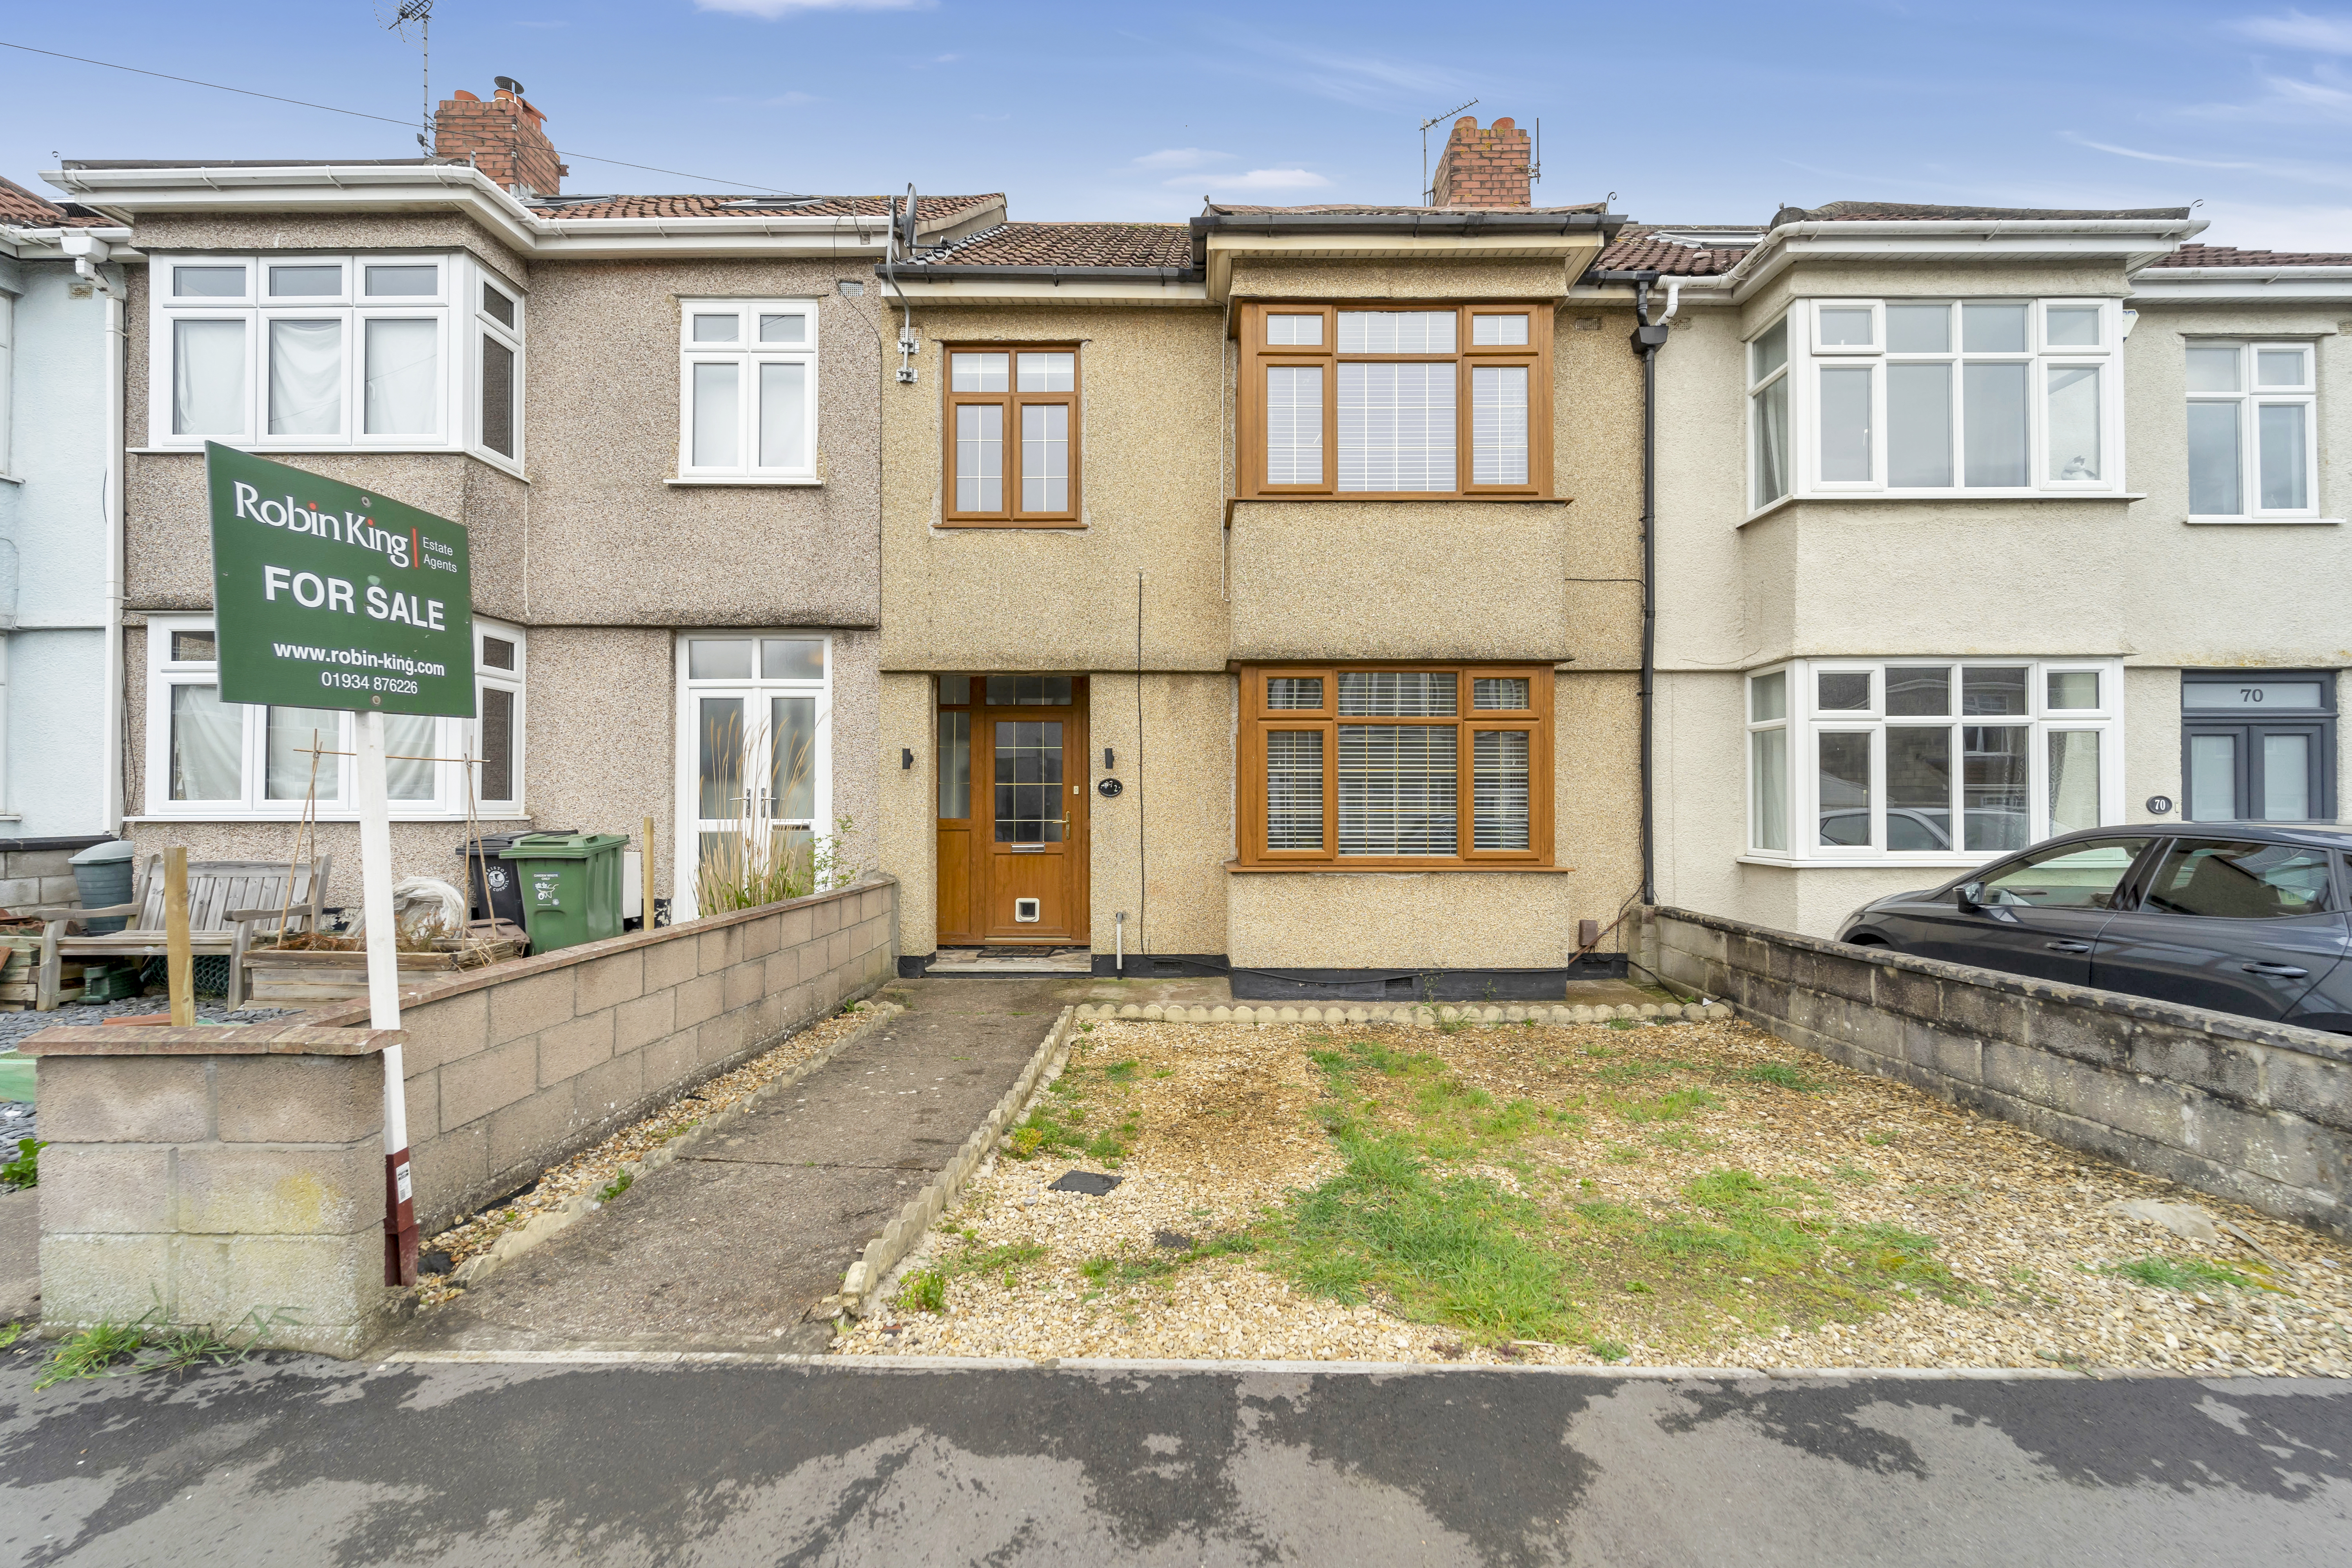 3 Bed Terrace with Garage on Melbury Road